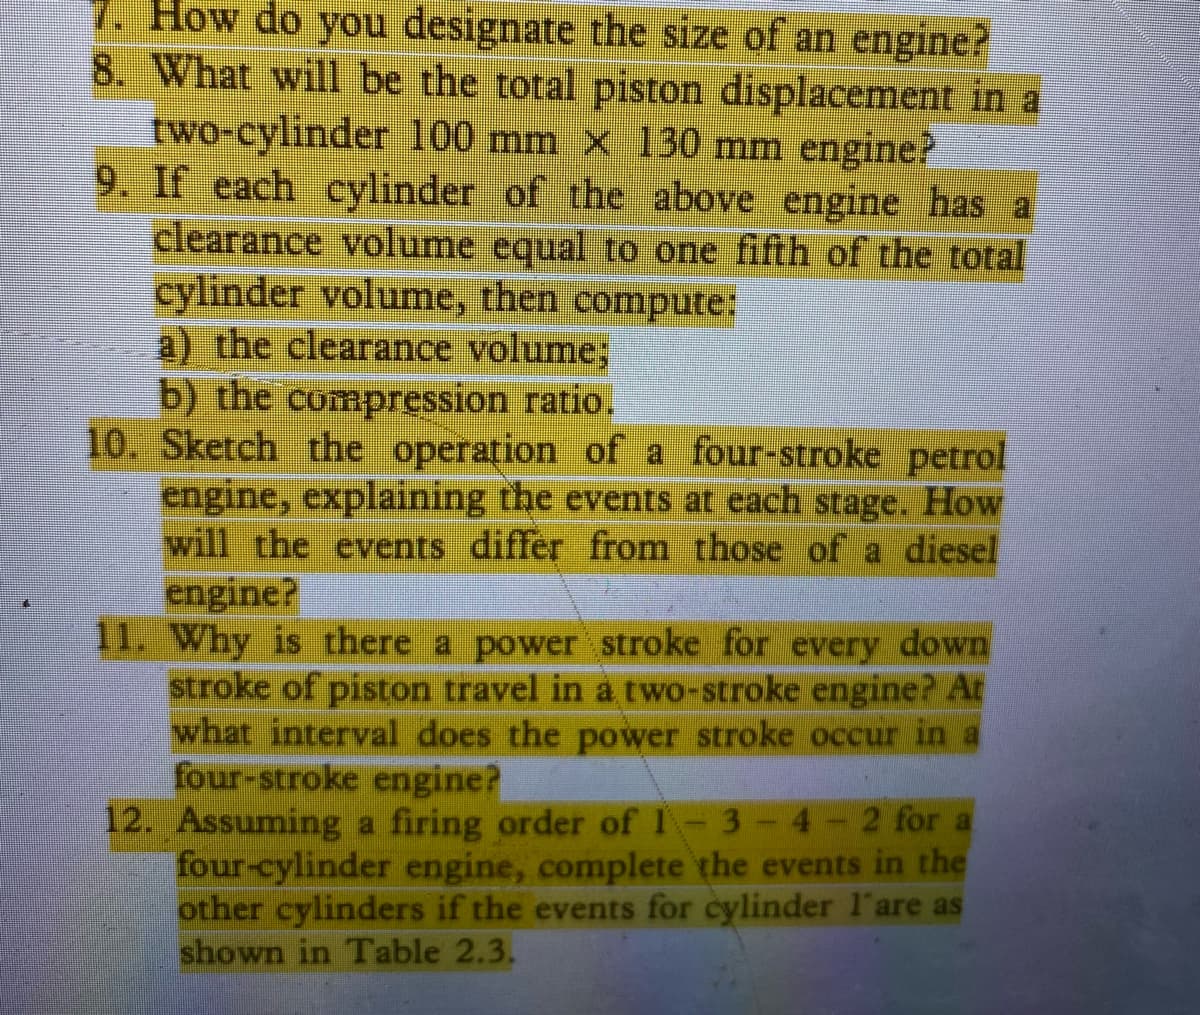 7. How do you designate the size of an engine?
8. What will be the total piston displacement in a
two-cylinder 100 mm x 130 mm engine?
9. If each cylinder of the above engine has a
clearance volume equal to one fifth of the total
cylinder volume, then compute:
a) the clearance volume;
b) the compression ratio.
10. Sketch the operation of a four-stroke petrol
engine, explaining the events at each stage. How
will the events differ from those of a diesel
engine?
11. Why is there a power stroke for every down
stroke of piston travel in a two-stroke engine? At
what interval does the power stroke occur in a
four-stroke engine?
12. Assuming a firing order of I
four-cylinder engine, complete the events in the
other cylinders if the events for cylinder l'are as
shown in Table 2.3.
3
2 for a
